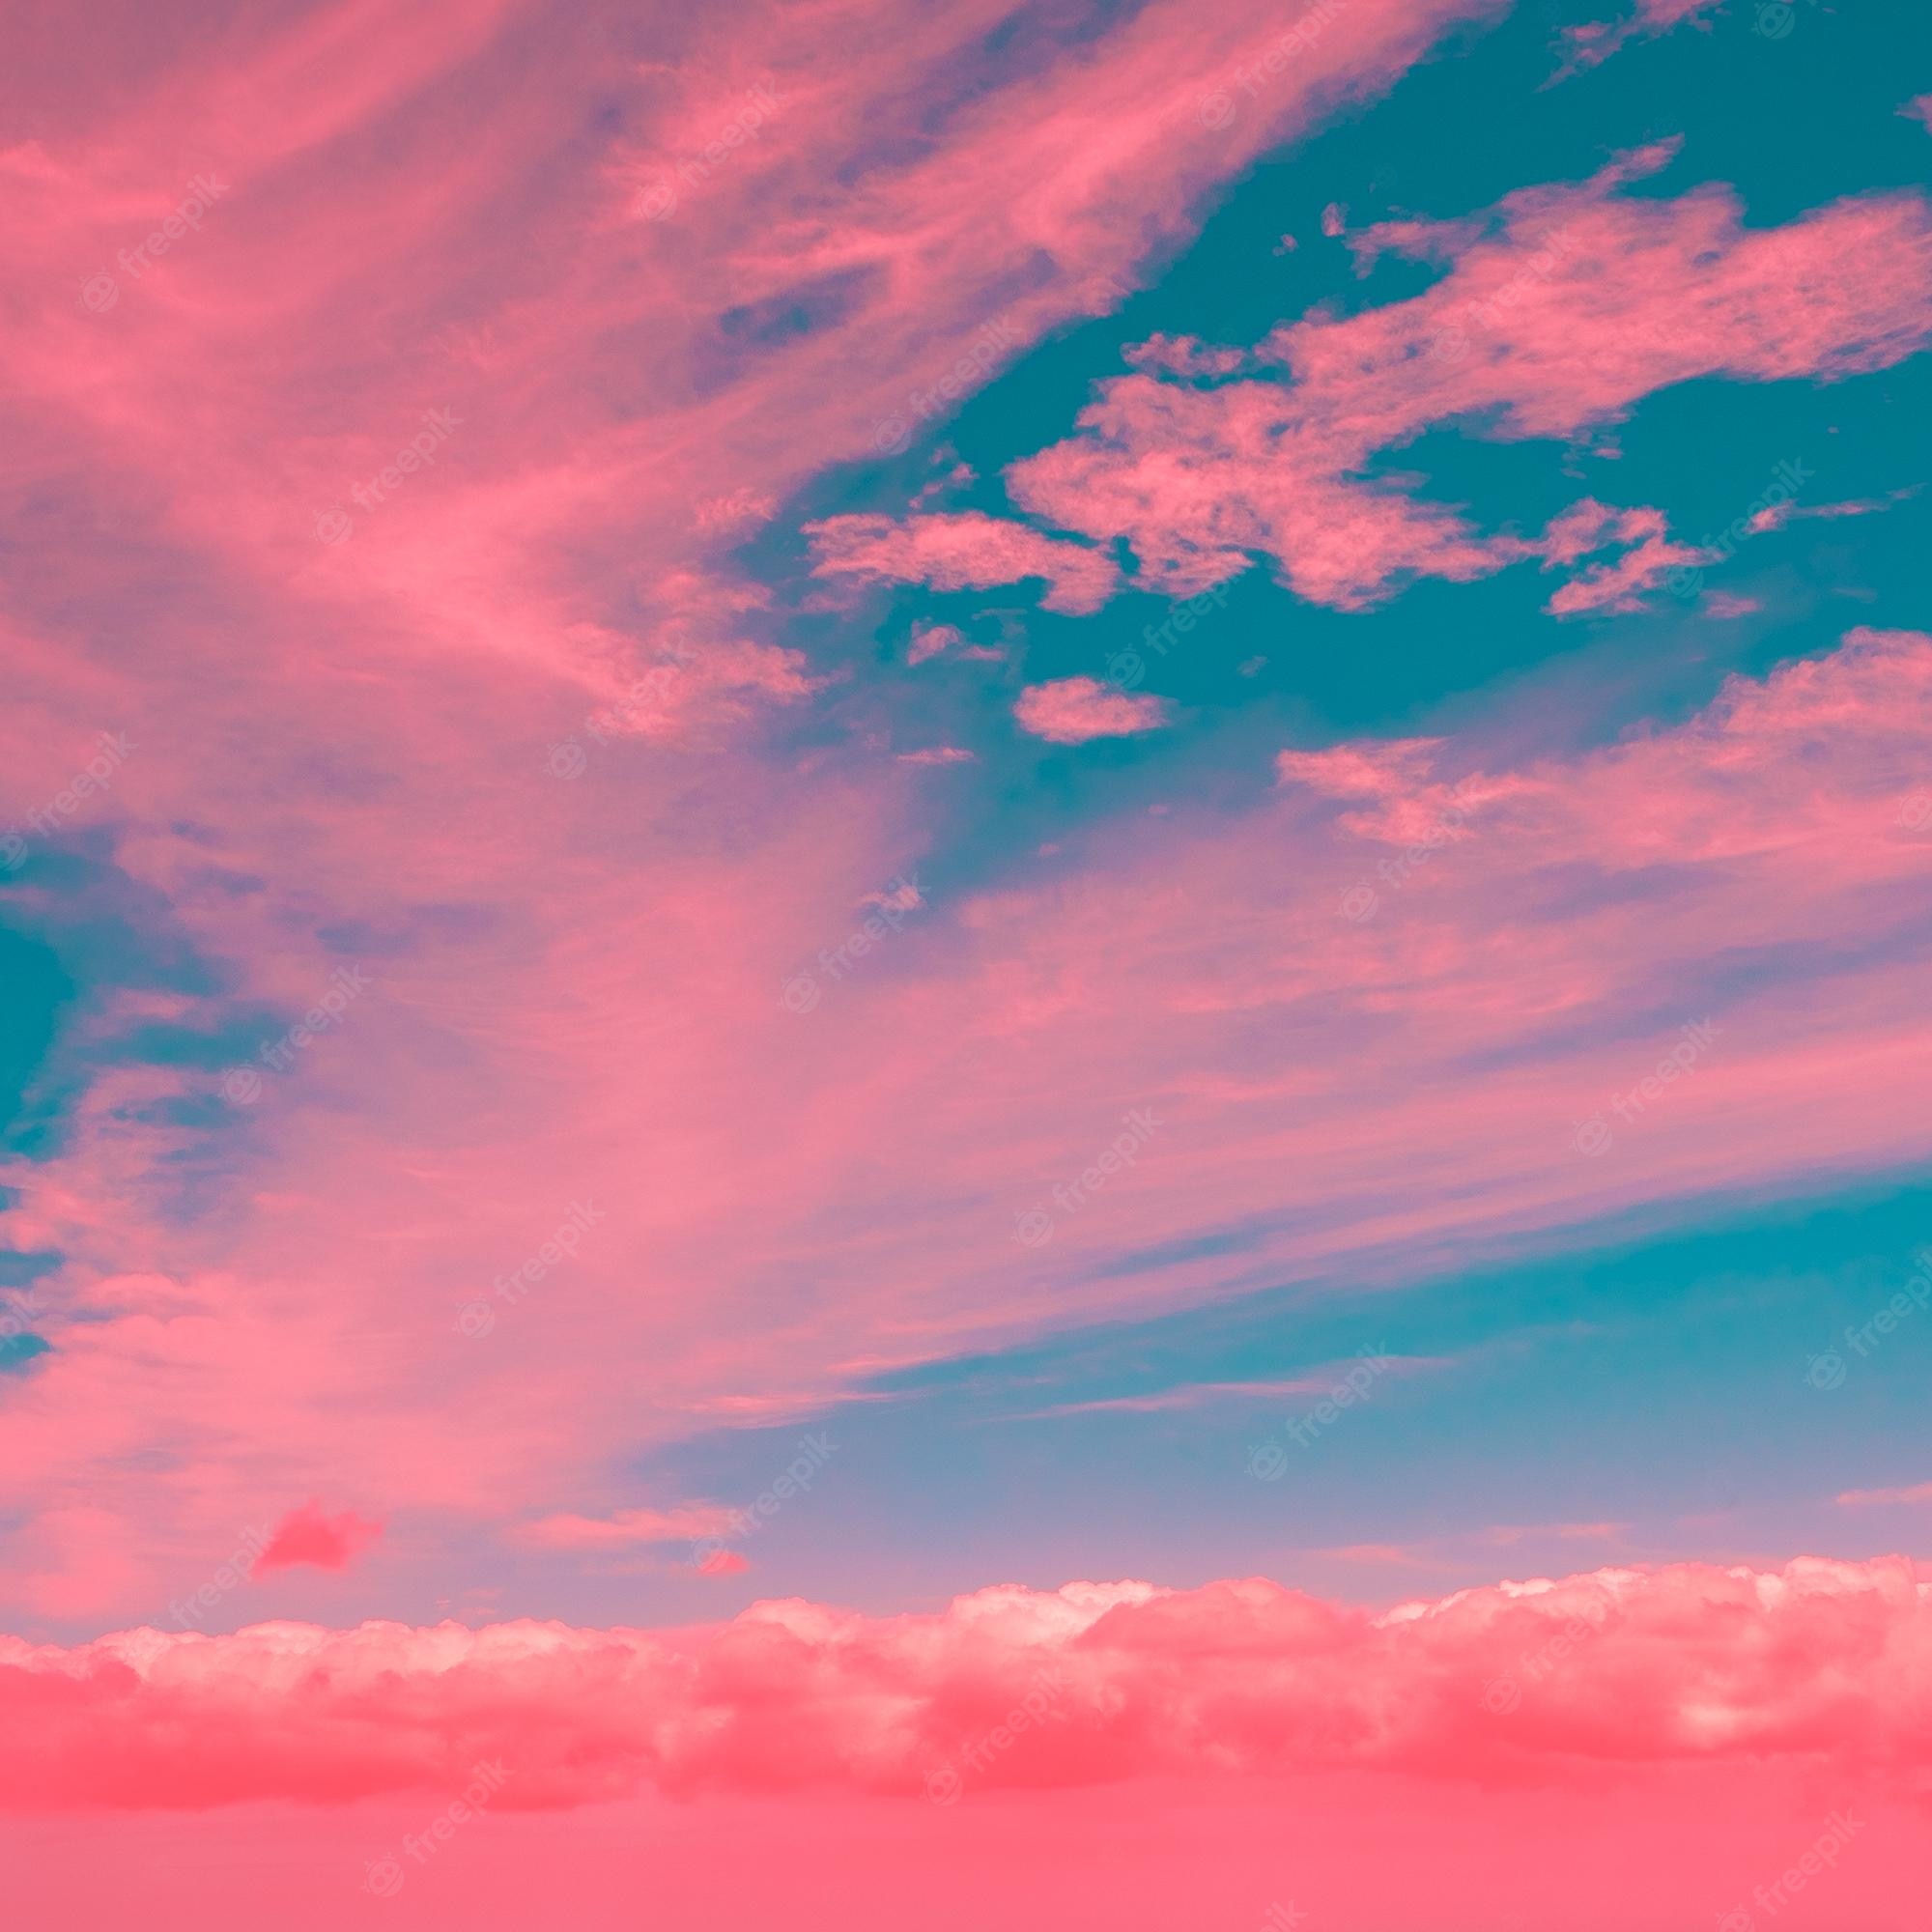 Premium Photo. Pink and blue sky surreal view ideal for postcard prints phone cases print tshirts stylish nature visual spirits wallpaper